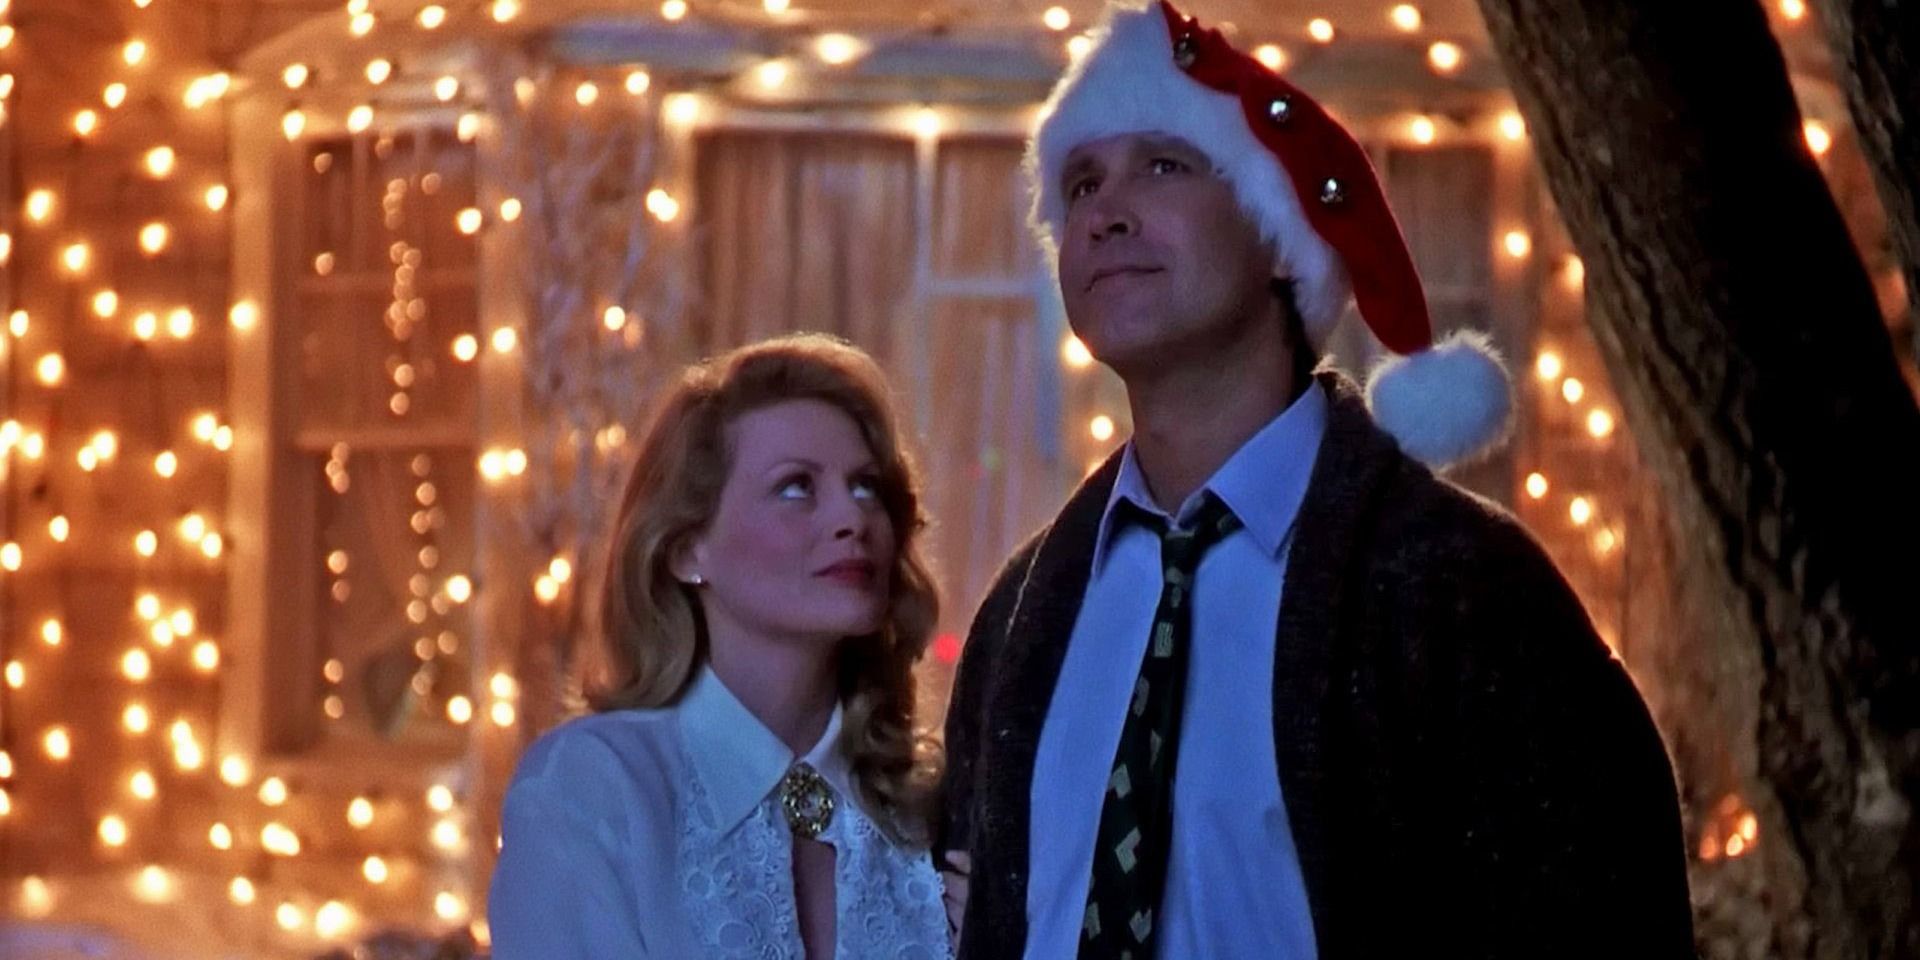 10 Things You Didn’t Know About The Making Of National Lampoon’s Christmas Vacation